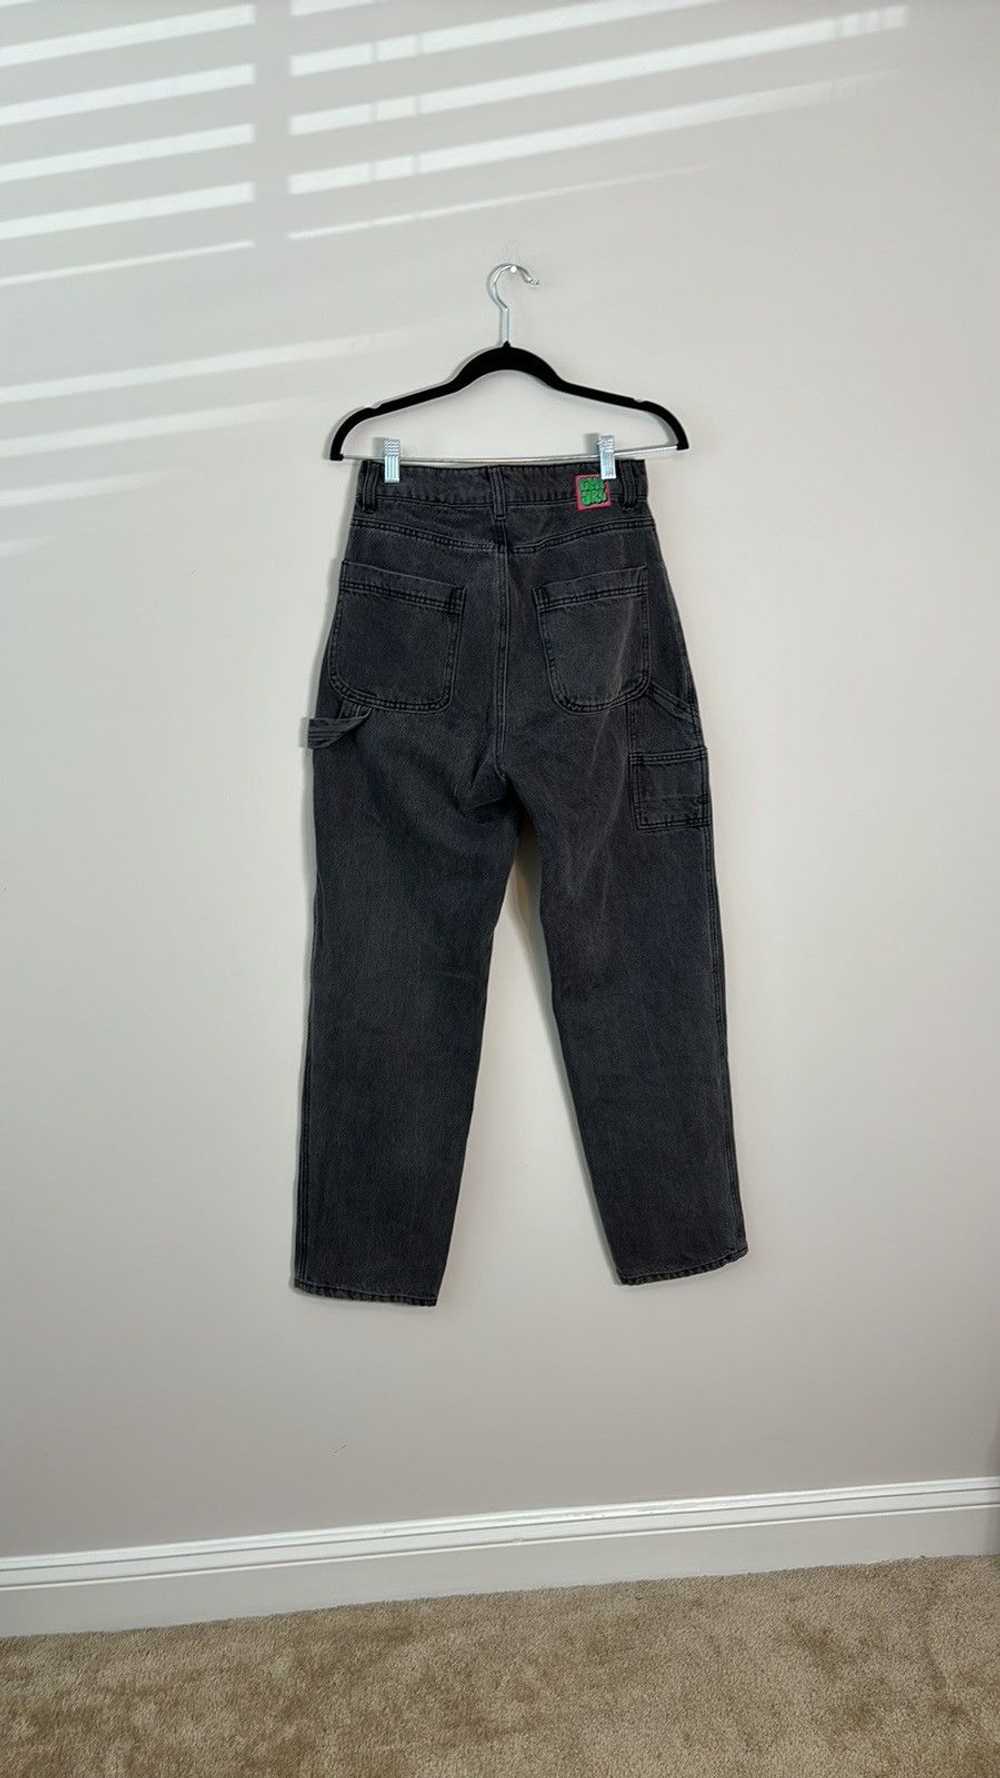 Empyre × Streetwear Empyre Jeans - image 4